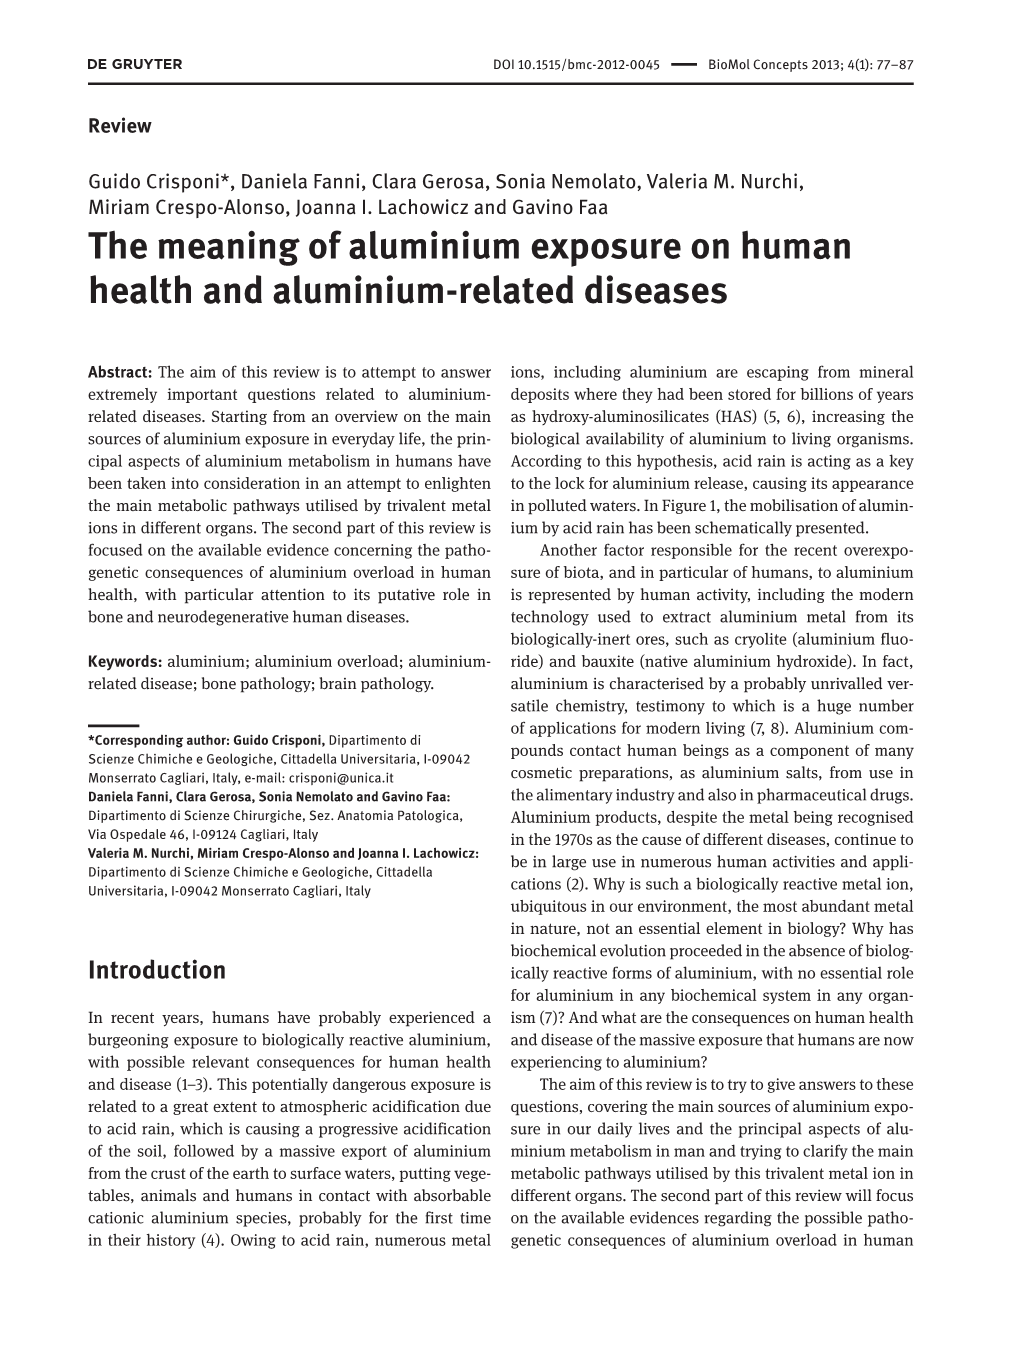 The Meaning of Aluminium Exposure on Human Health and Aluminium-Related Diseases